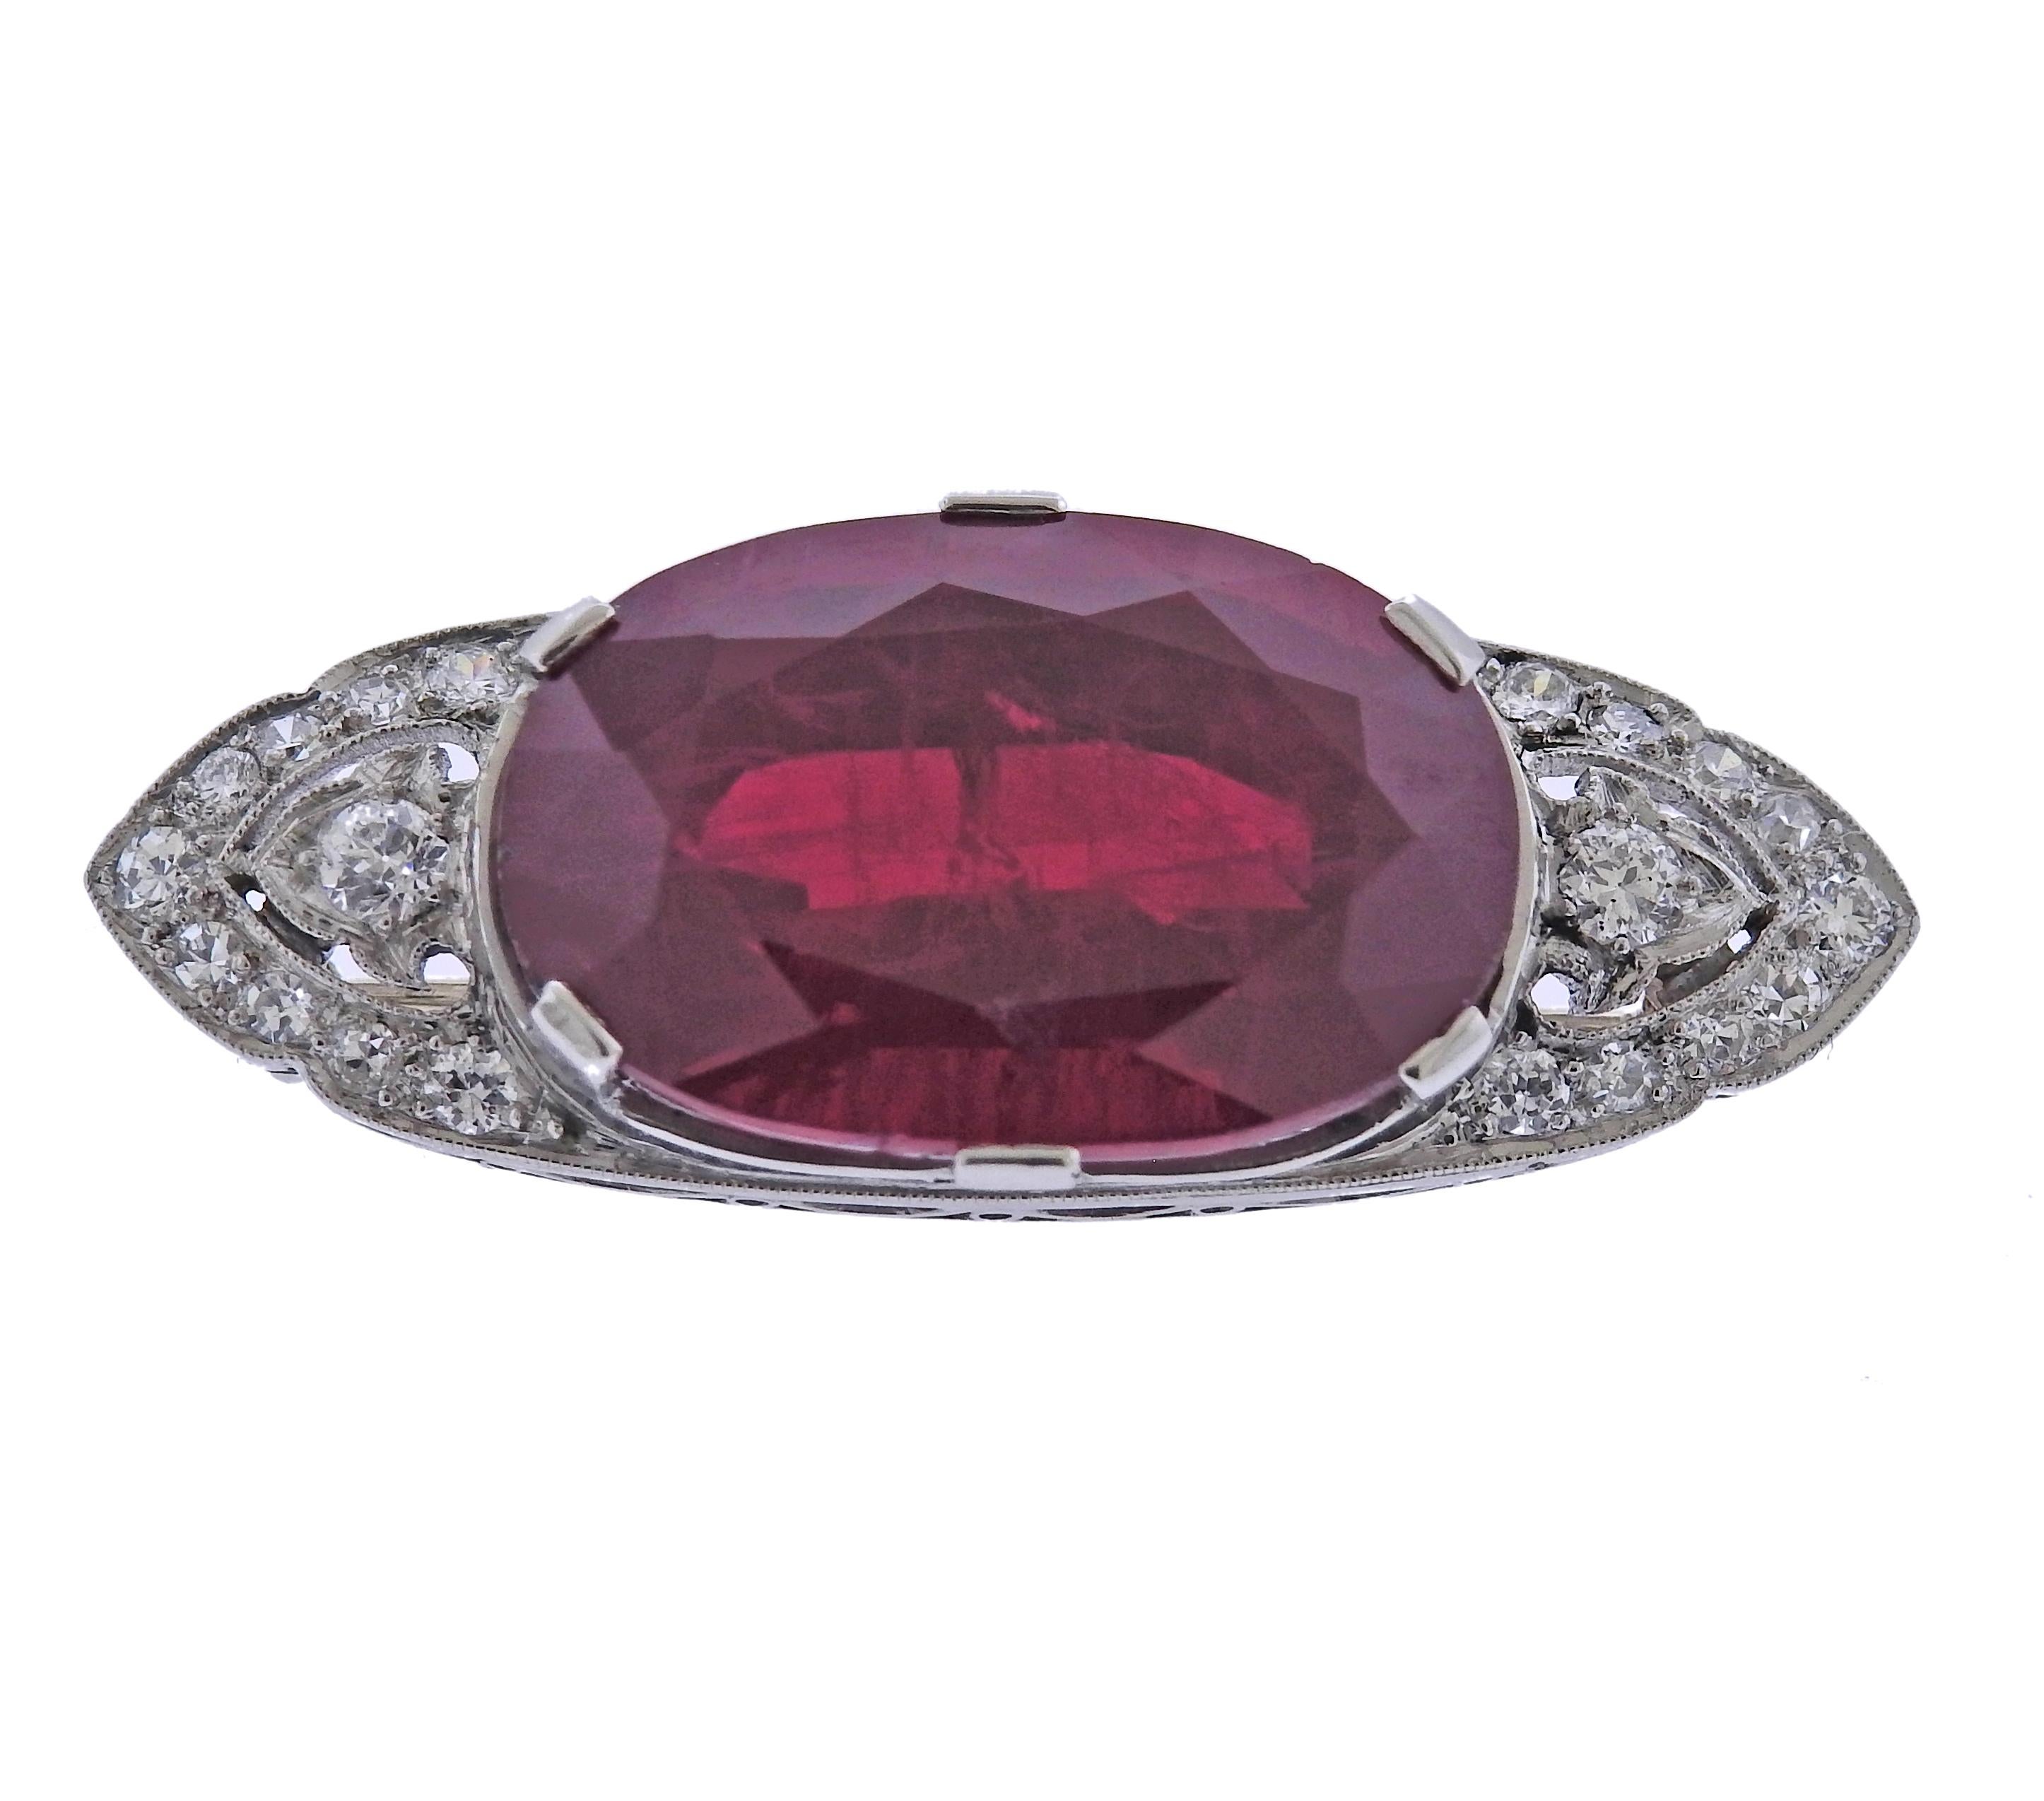 Platinum Art Deco brooch, with center 21.7 x 14.5 x 10.6mm ruby (chipped on the top) and approx. 0.40ctw in diamonds. Brooch measures 38mm x 15mm. Weight - 12.5 grams.